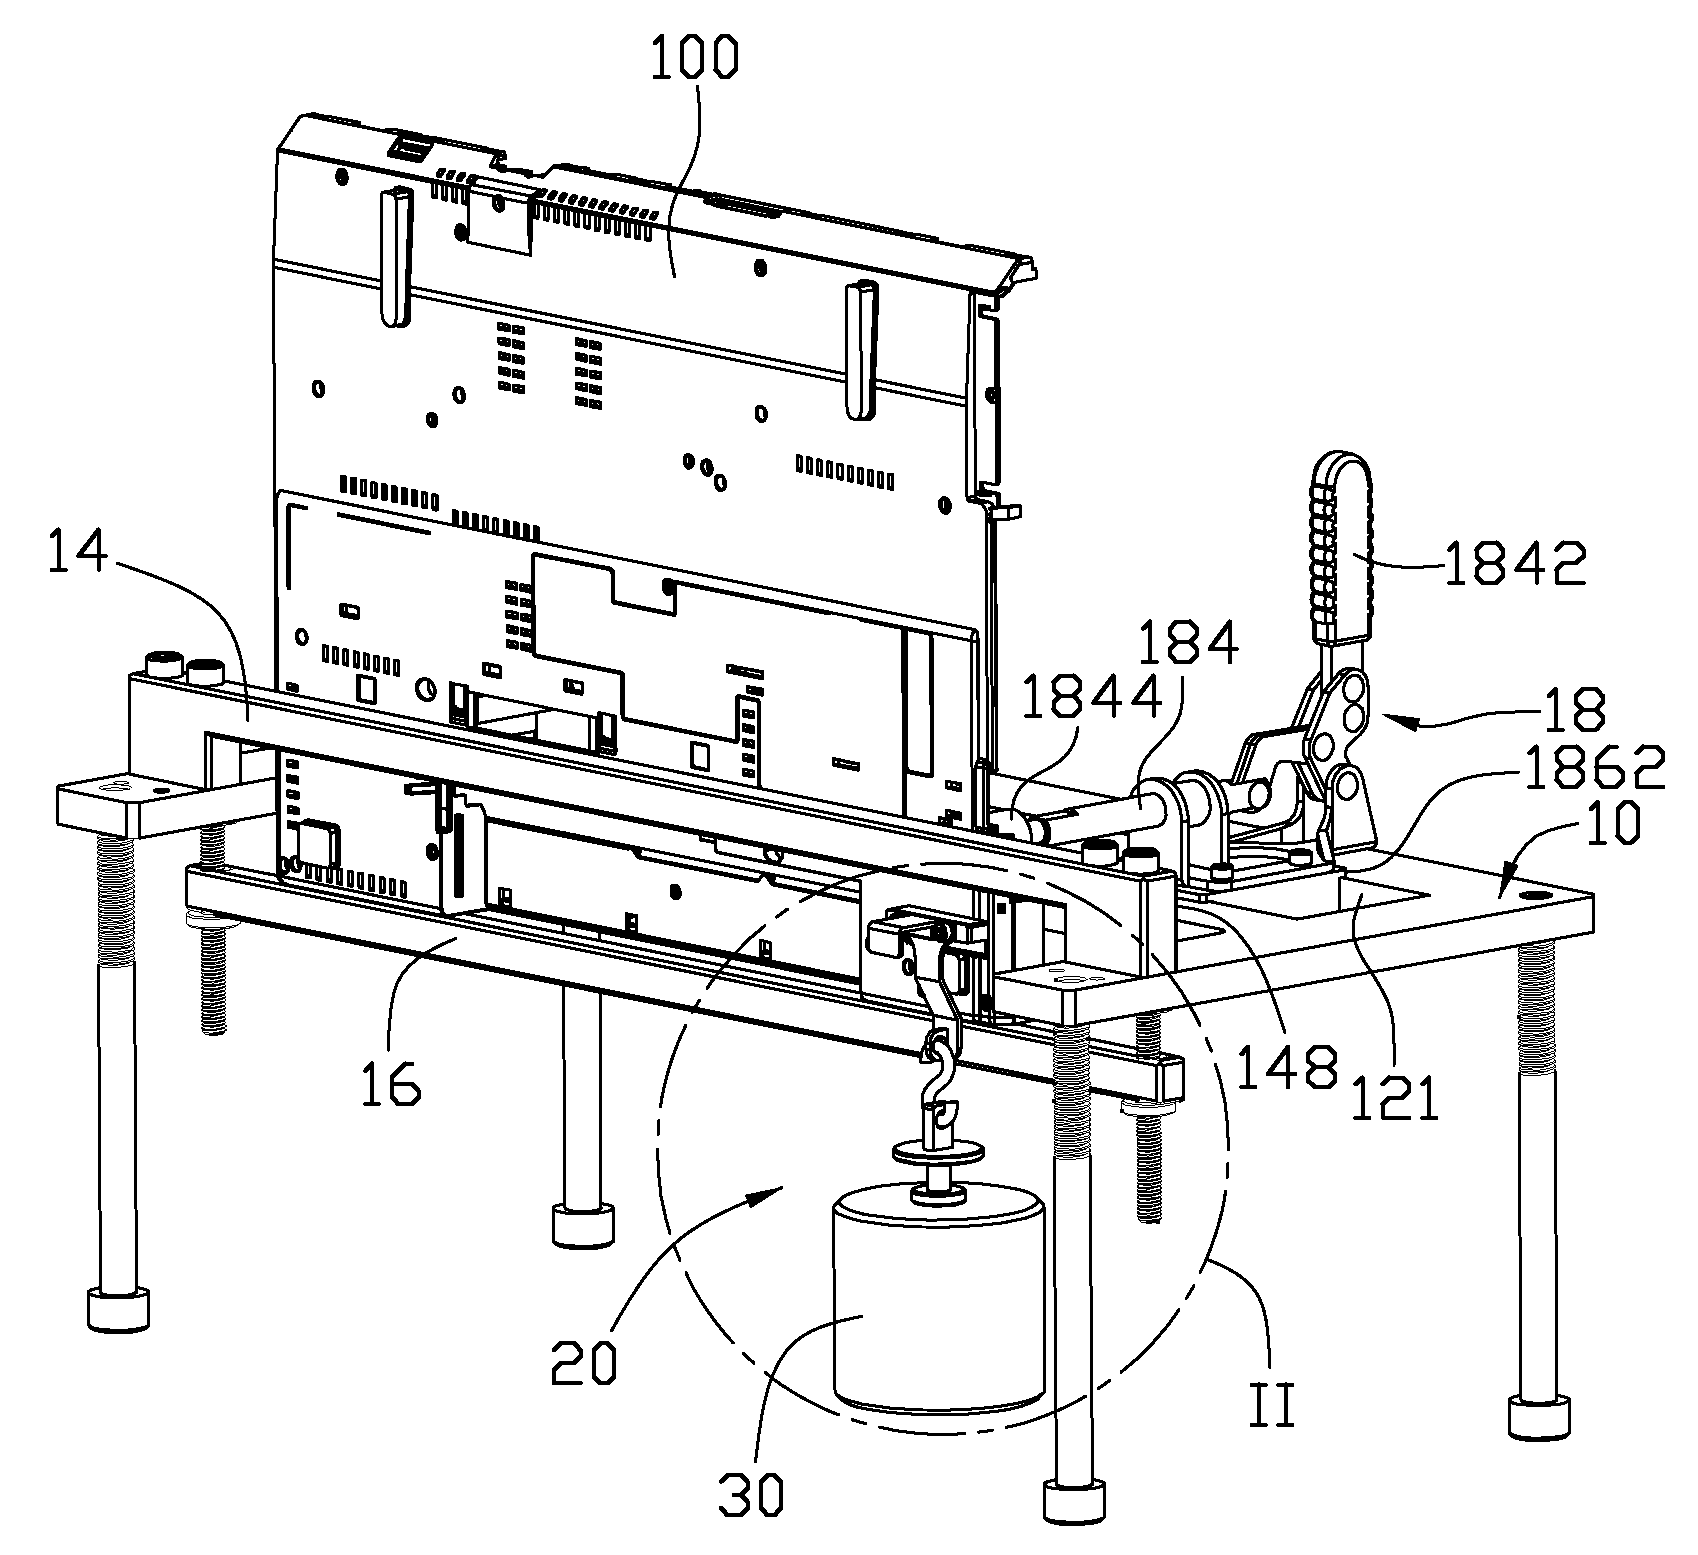 Connection strength testing device